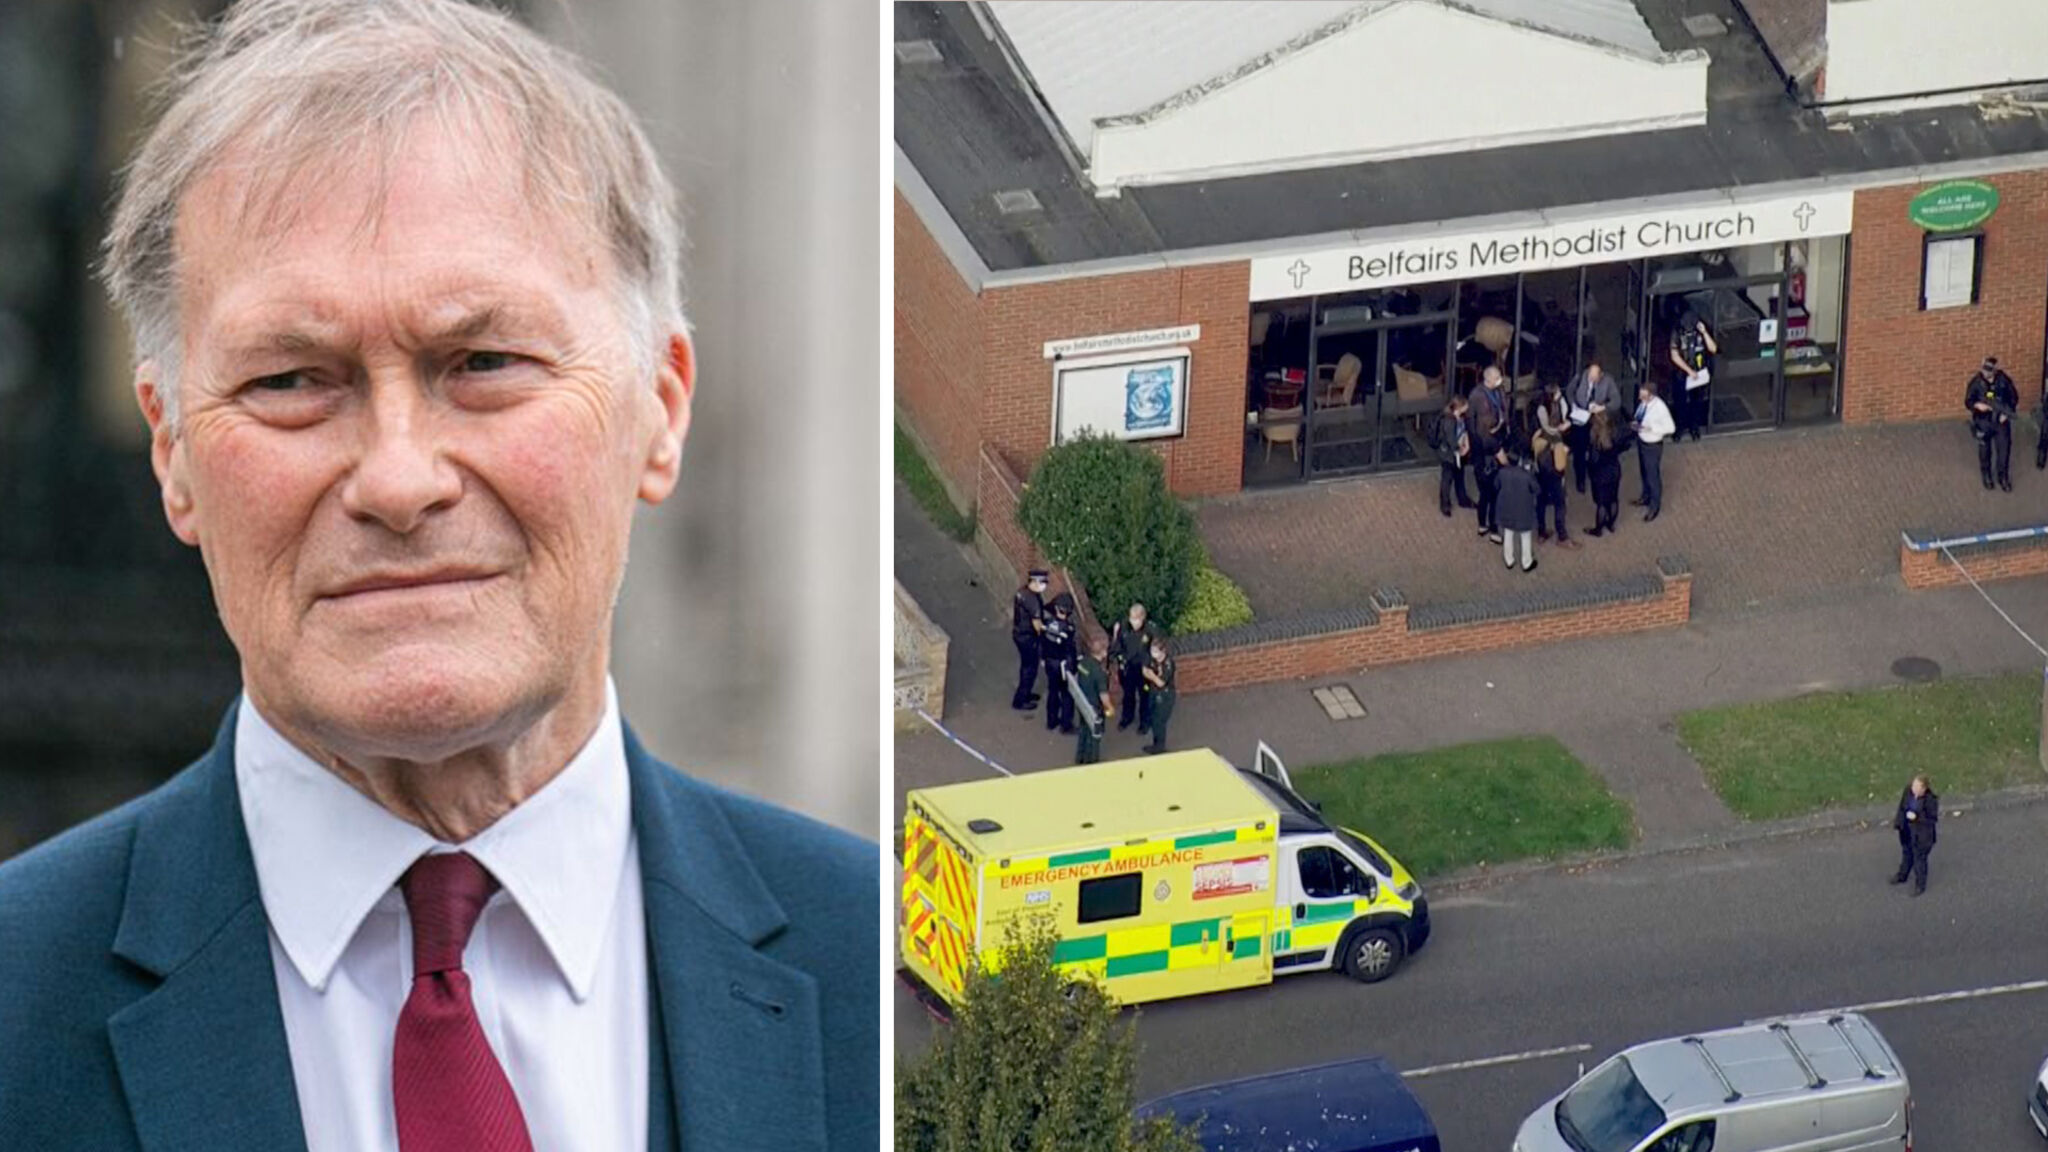 Senior British politician dies after being stabbed in church - VG